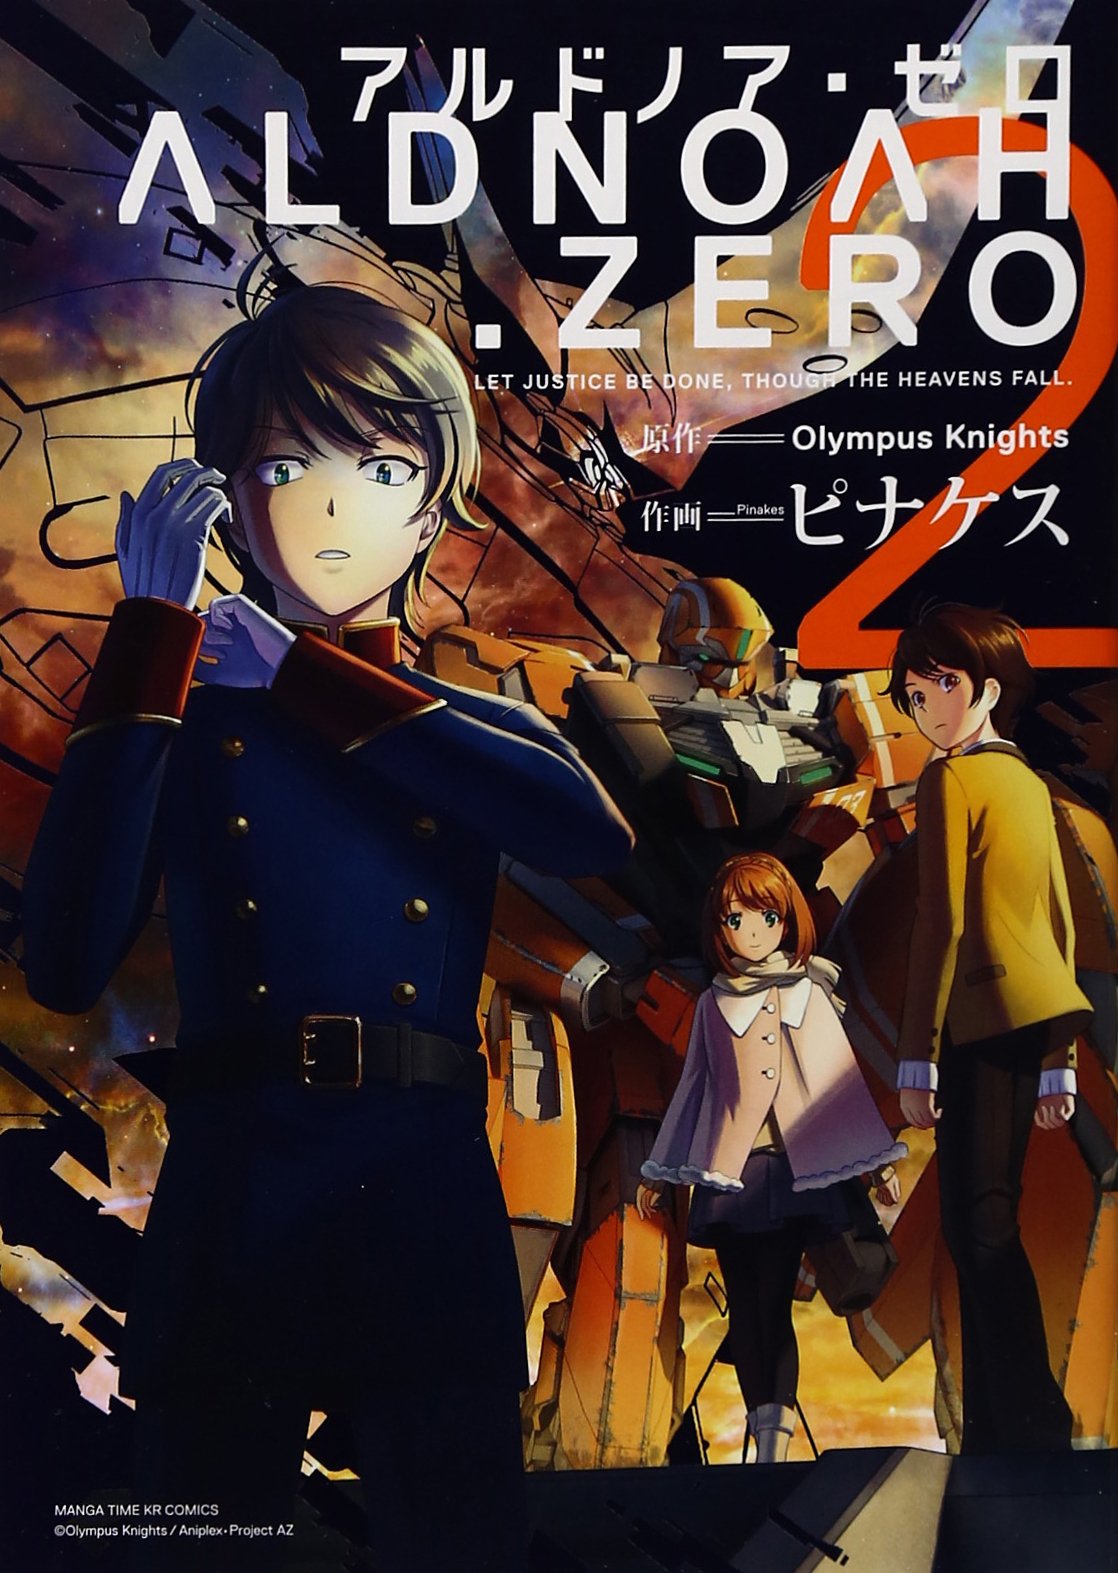 AldnoahZero Second Cour Episode 9 Preview Images and Video  Otaku Tale